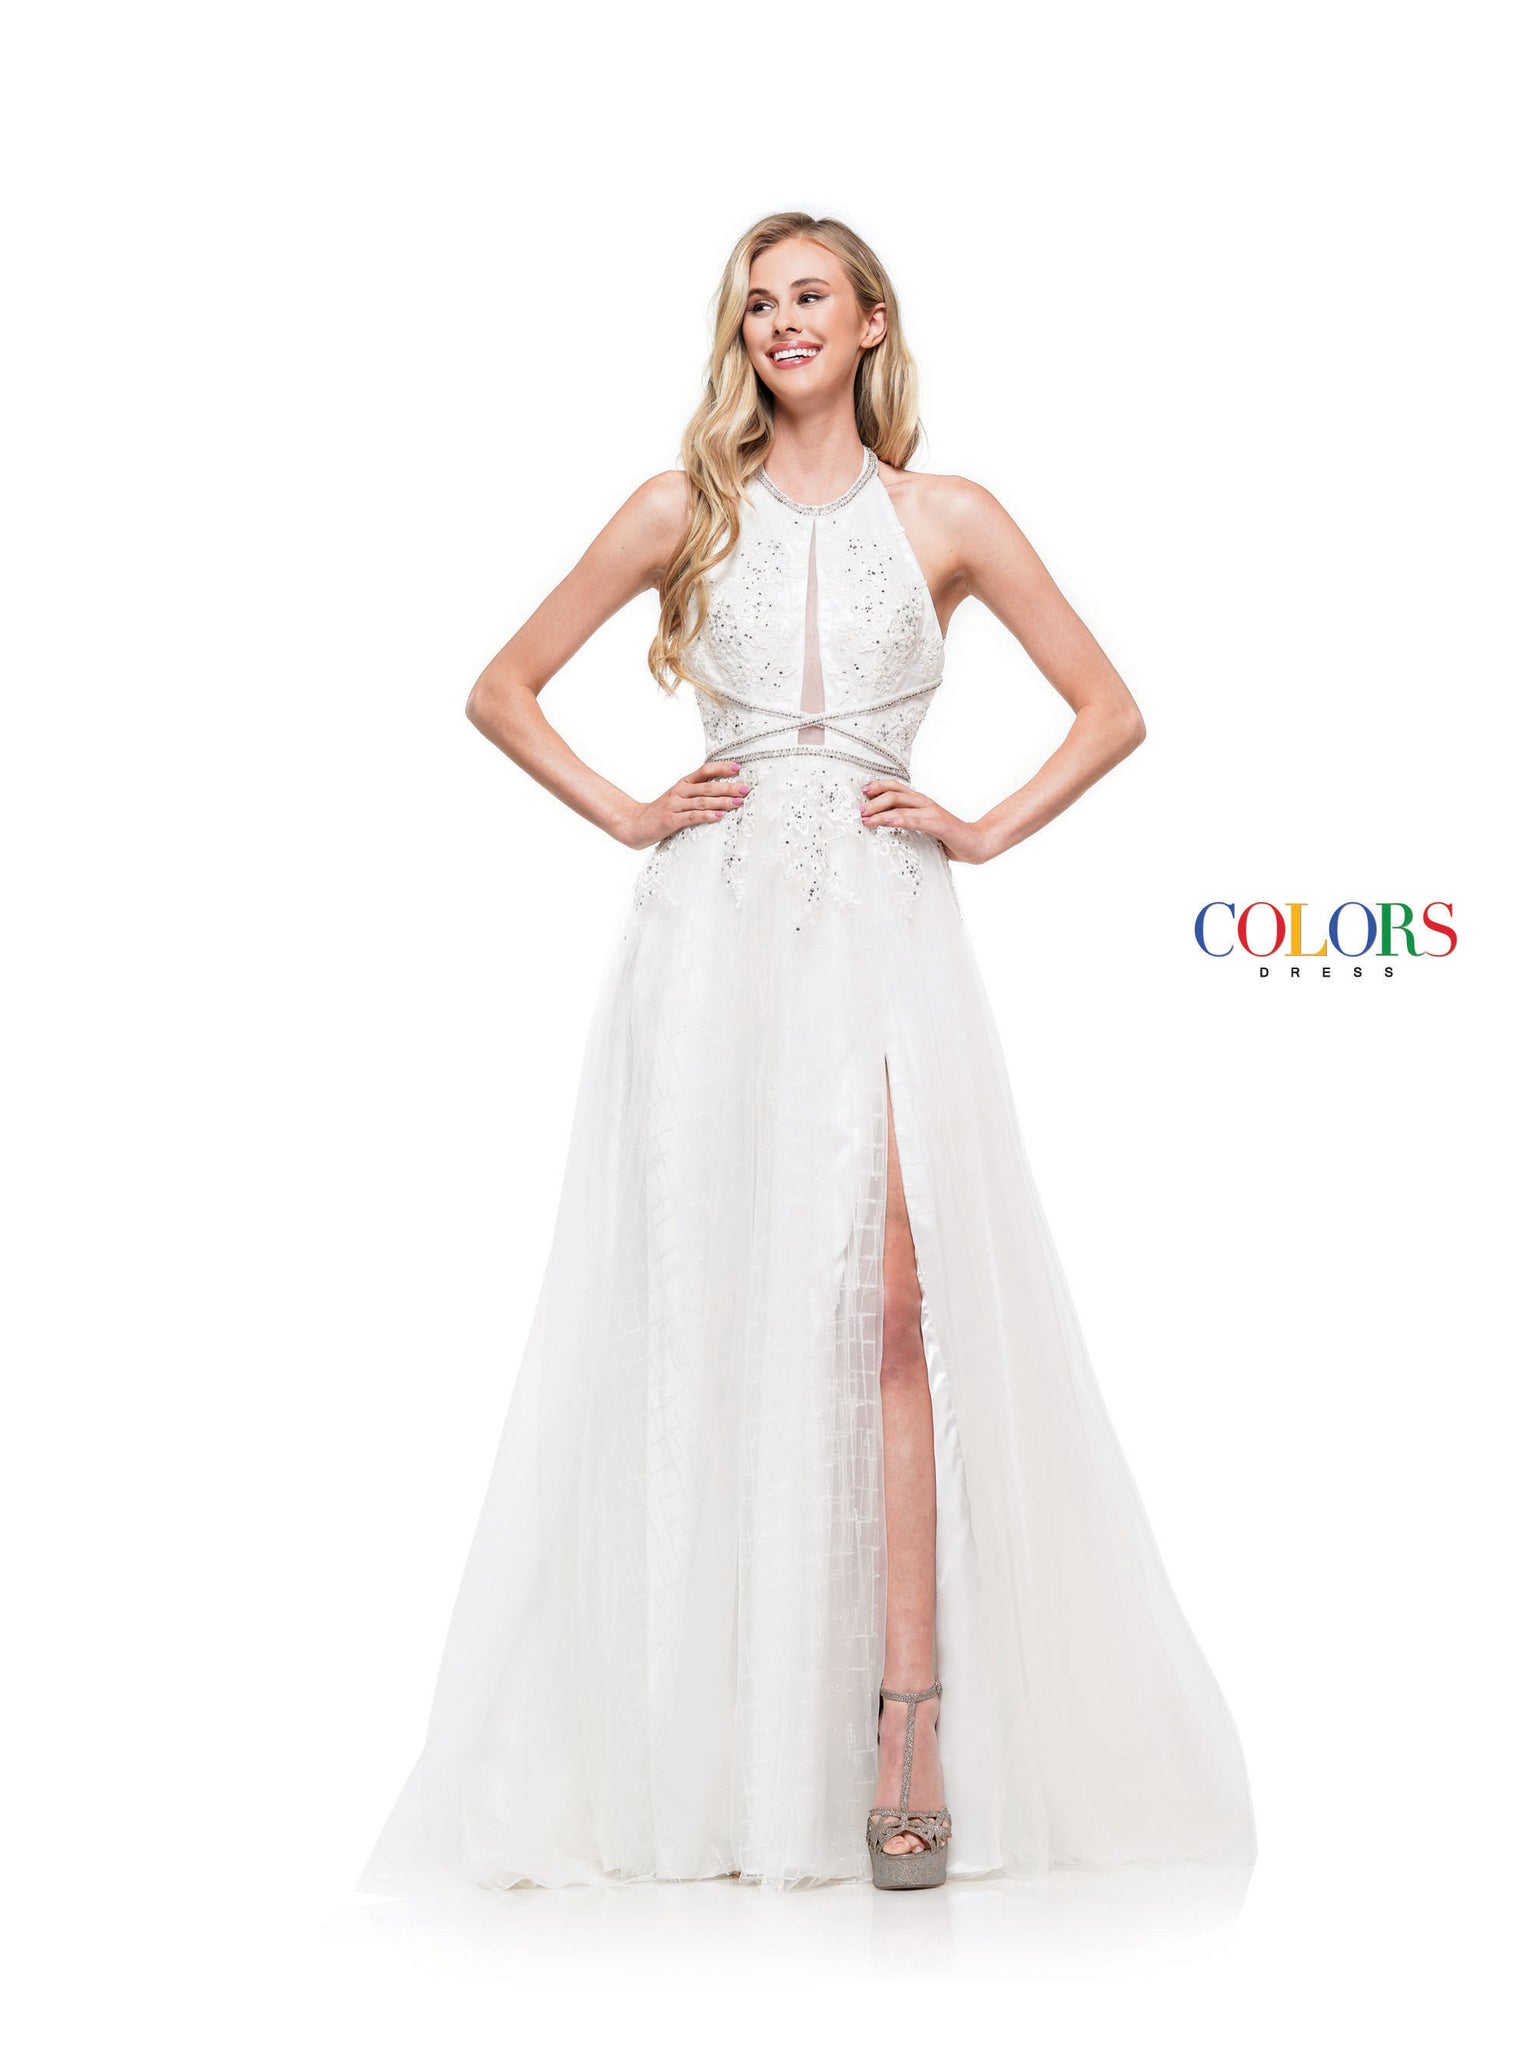 High halter neck sequin A-line dress with lace applique and stone tape band on waist & neck.  Sizes: 00-24  Available in White, Rose Gold, Navy  If we do not have your desired size or color in stock please call or email us for availability!